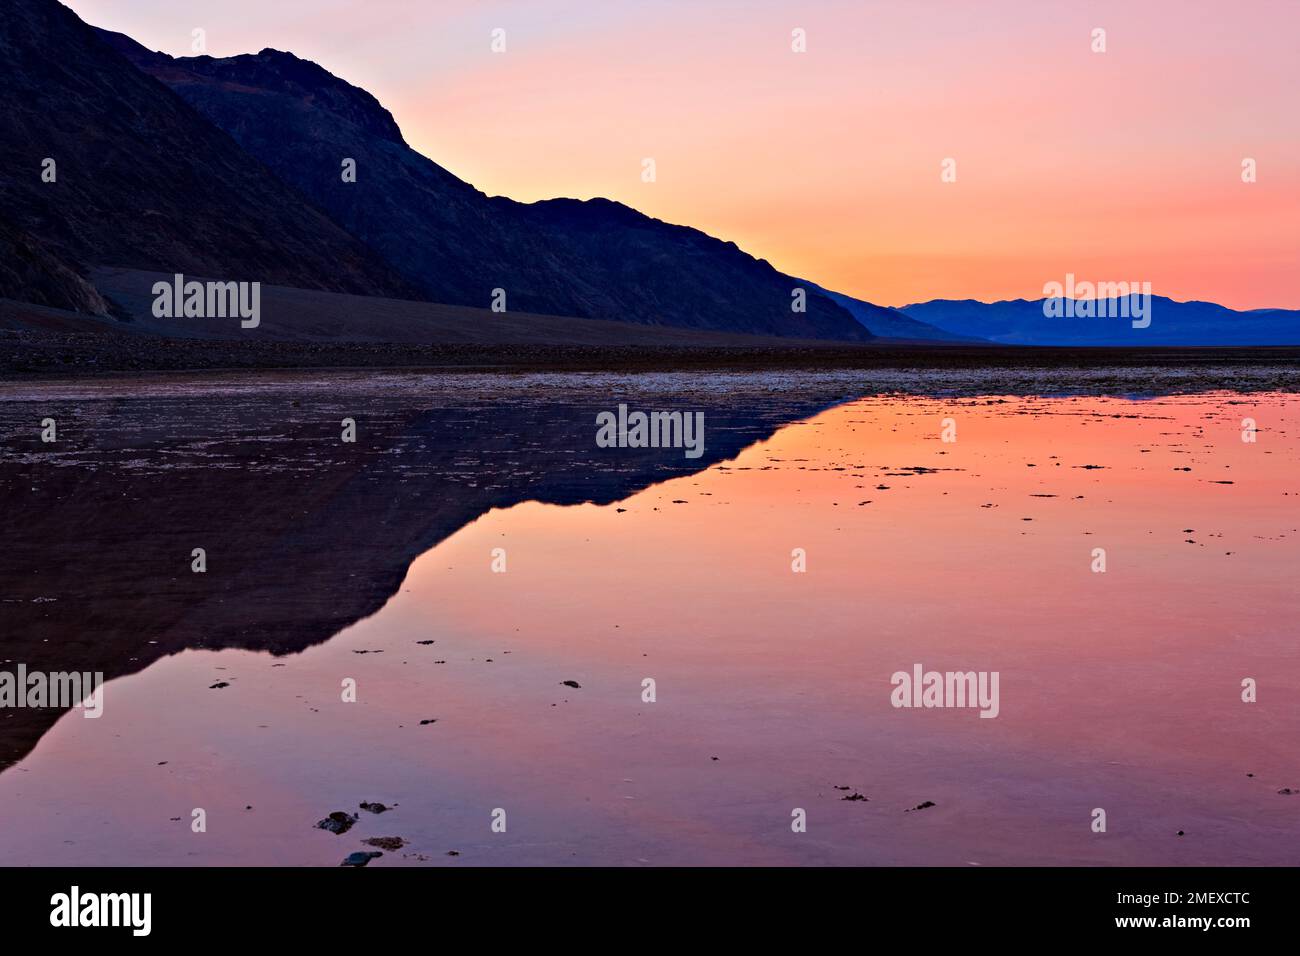 Badwater Basin, Death Valley National Park, California, USA Stock Photo